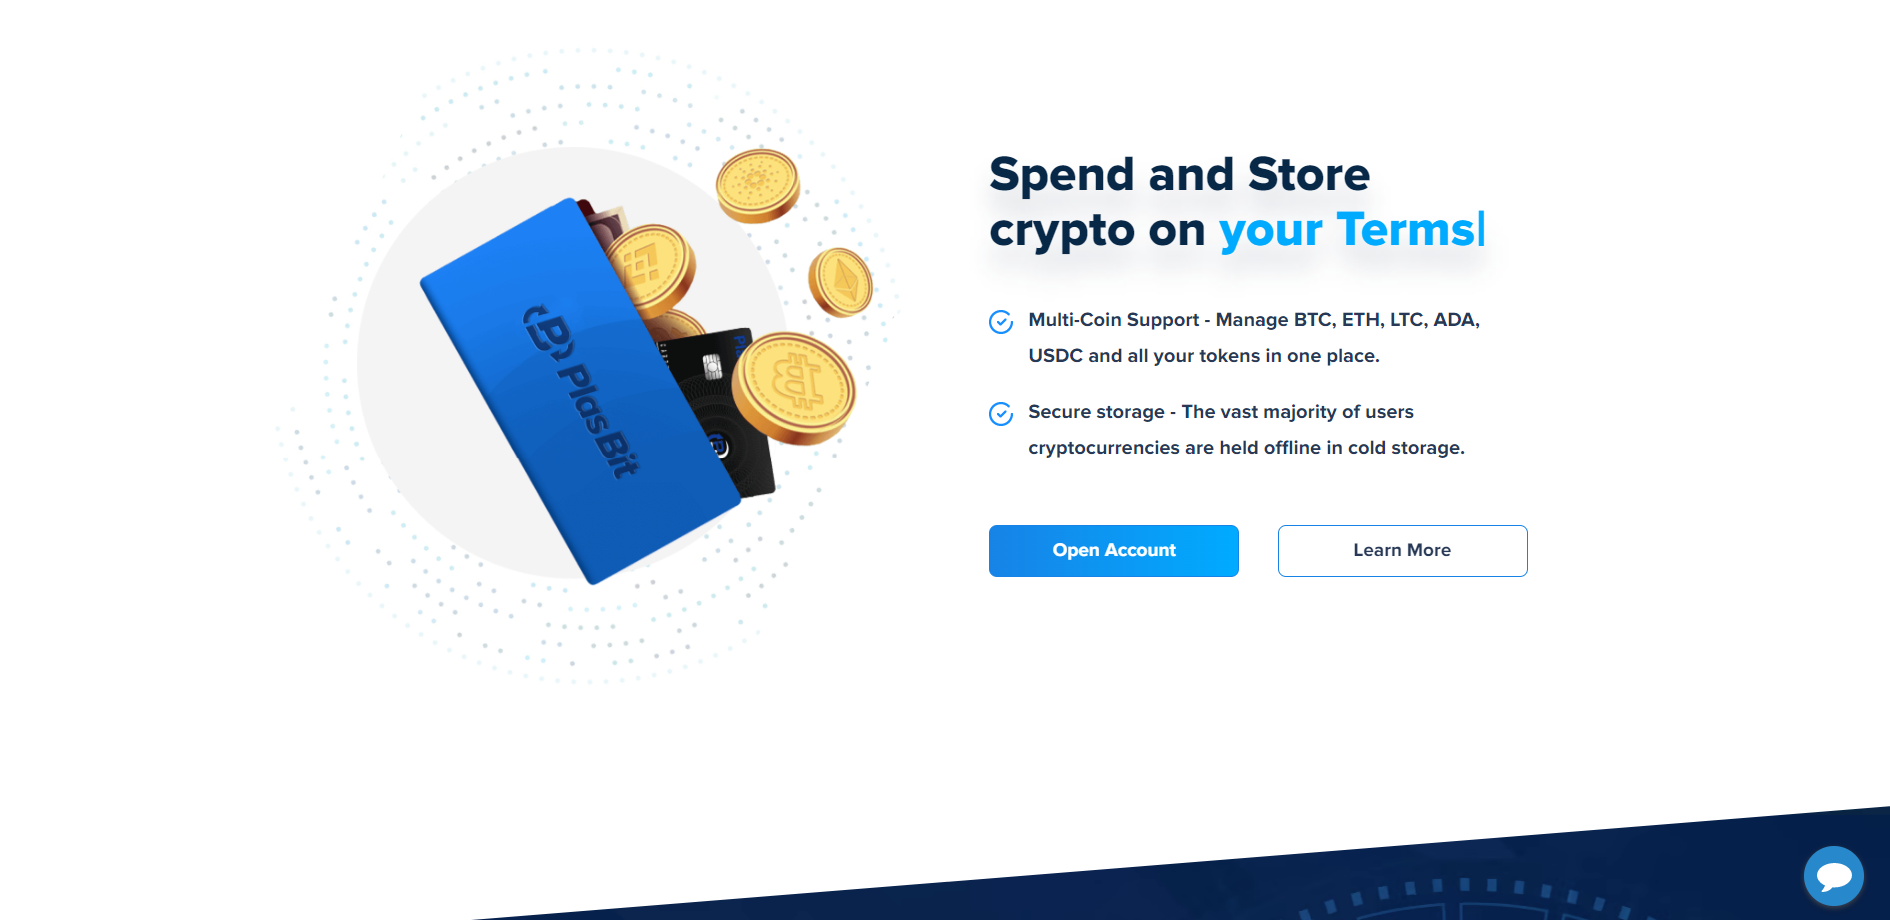 Spend and Store crypto on your Terms